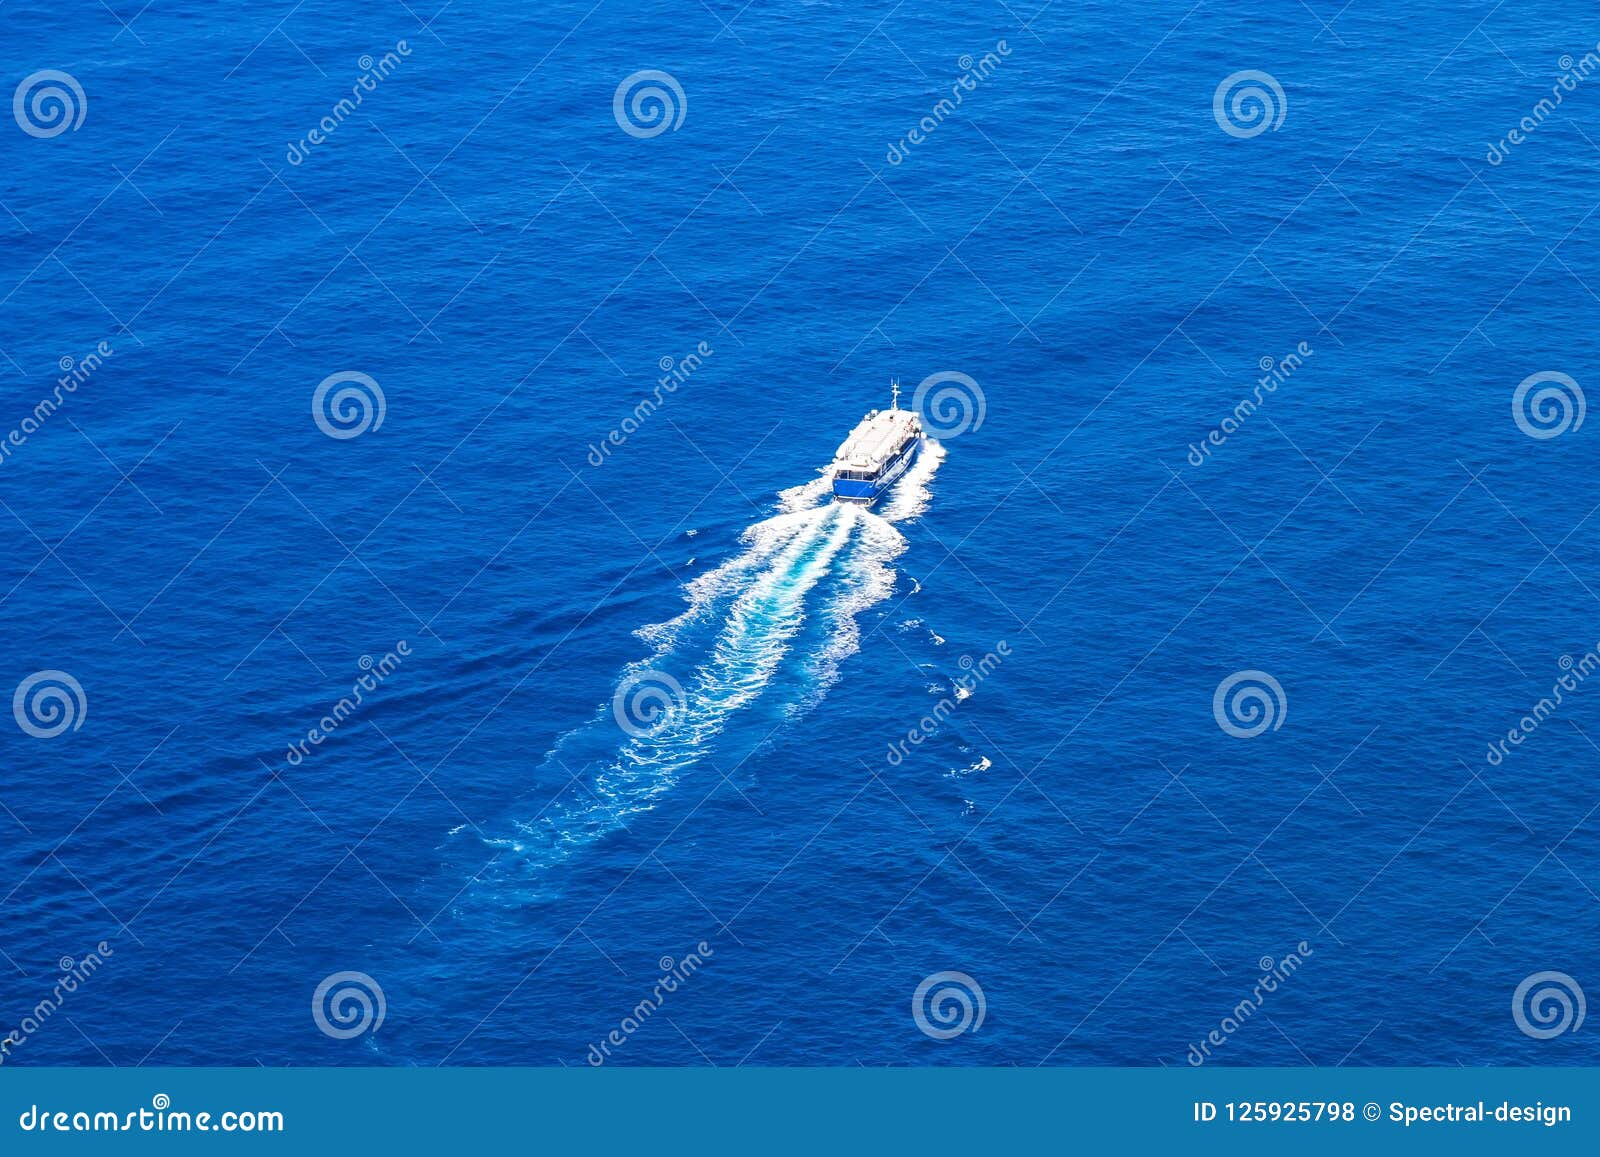 A Boat Cruising on the Mediterranean Sea Stock Photo - Image of boat ...